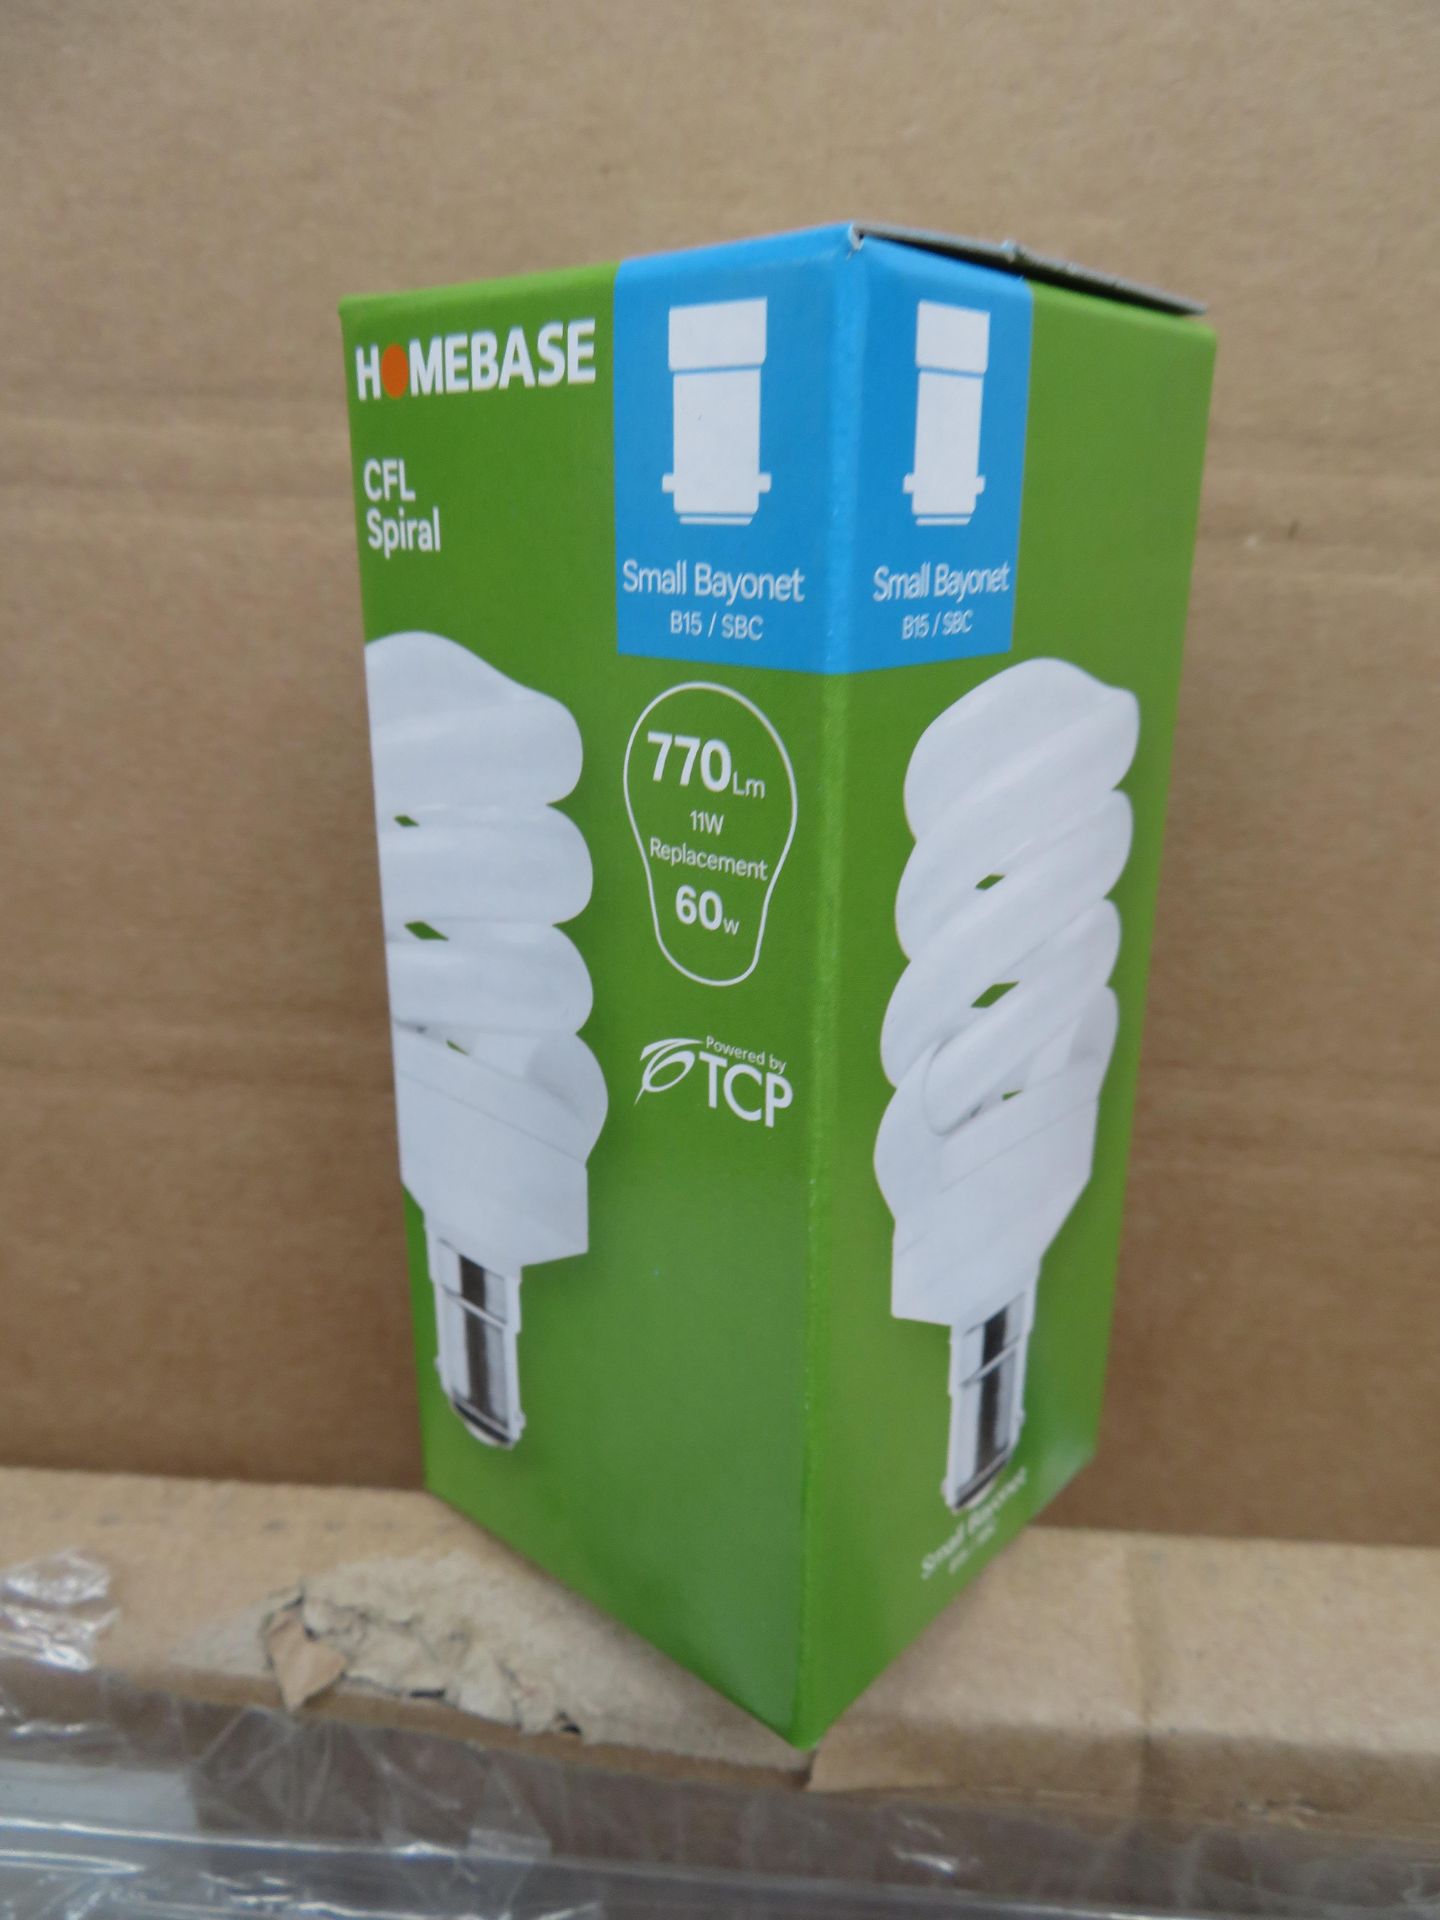 PALLET TO CONTAIN 1,020 BRAND NEW HOMEBASE CFL SIPRAL LIGHT BULBS. SMALL BAYONET CAP. 9W REPLACEMENT - Bild 2 aus 2